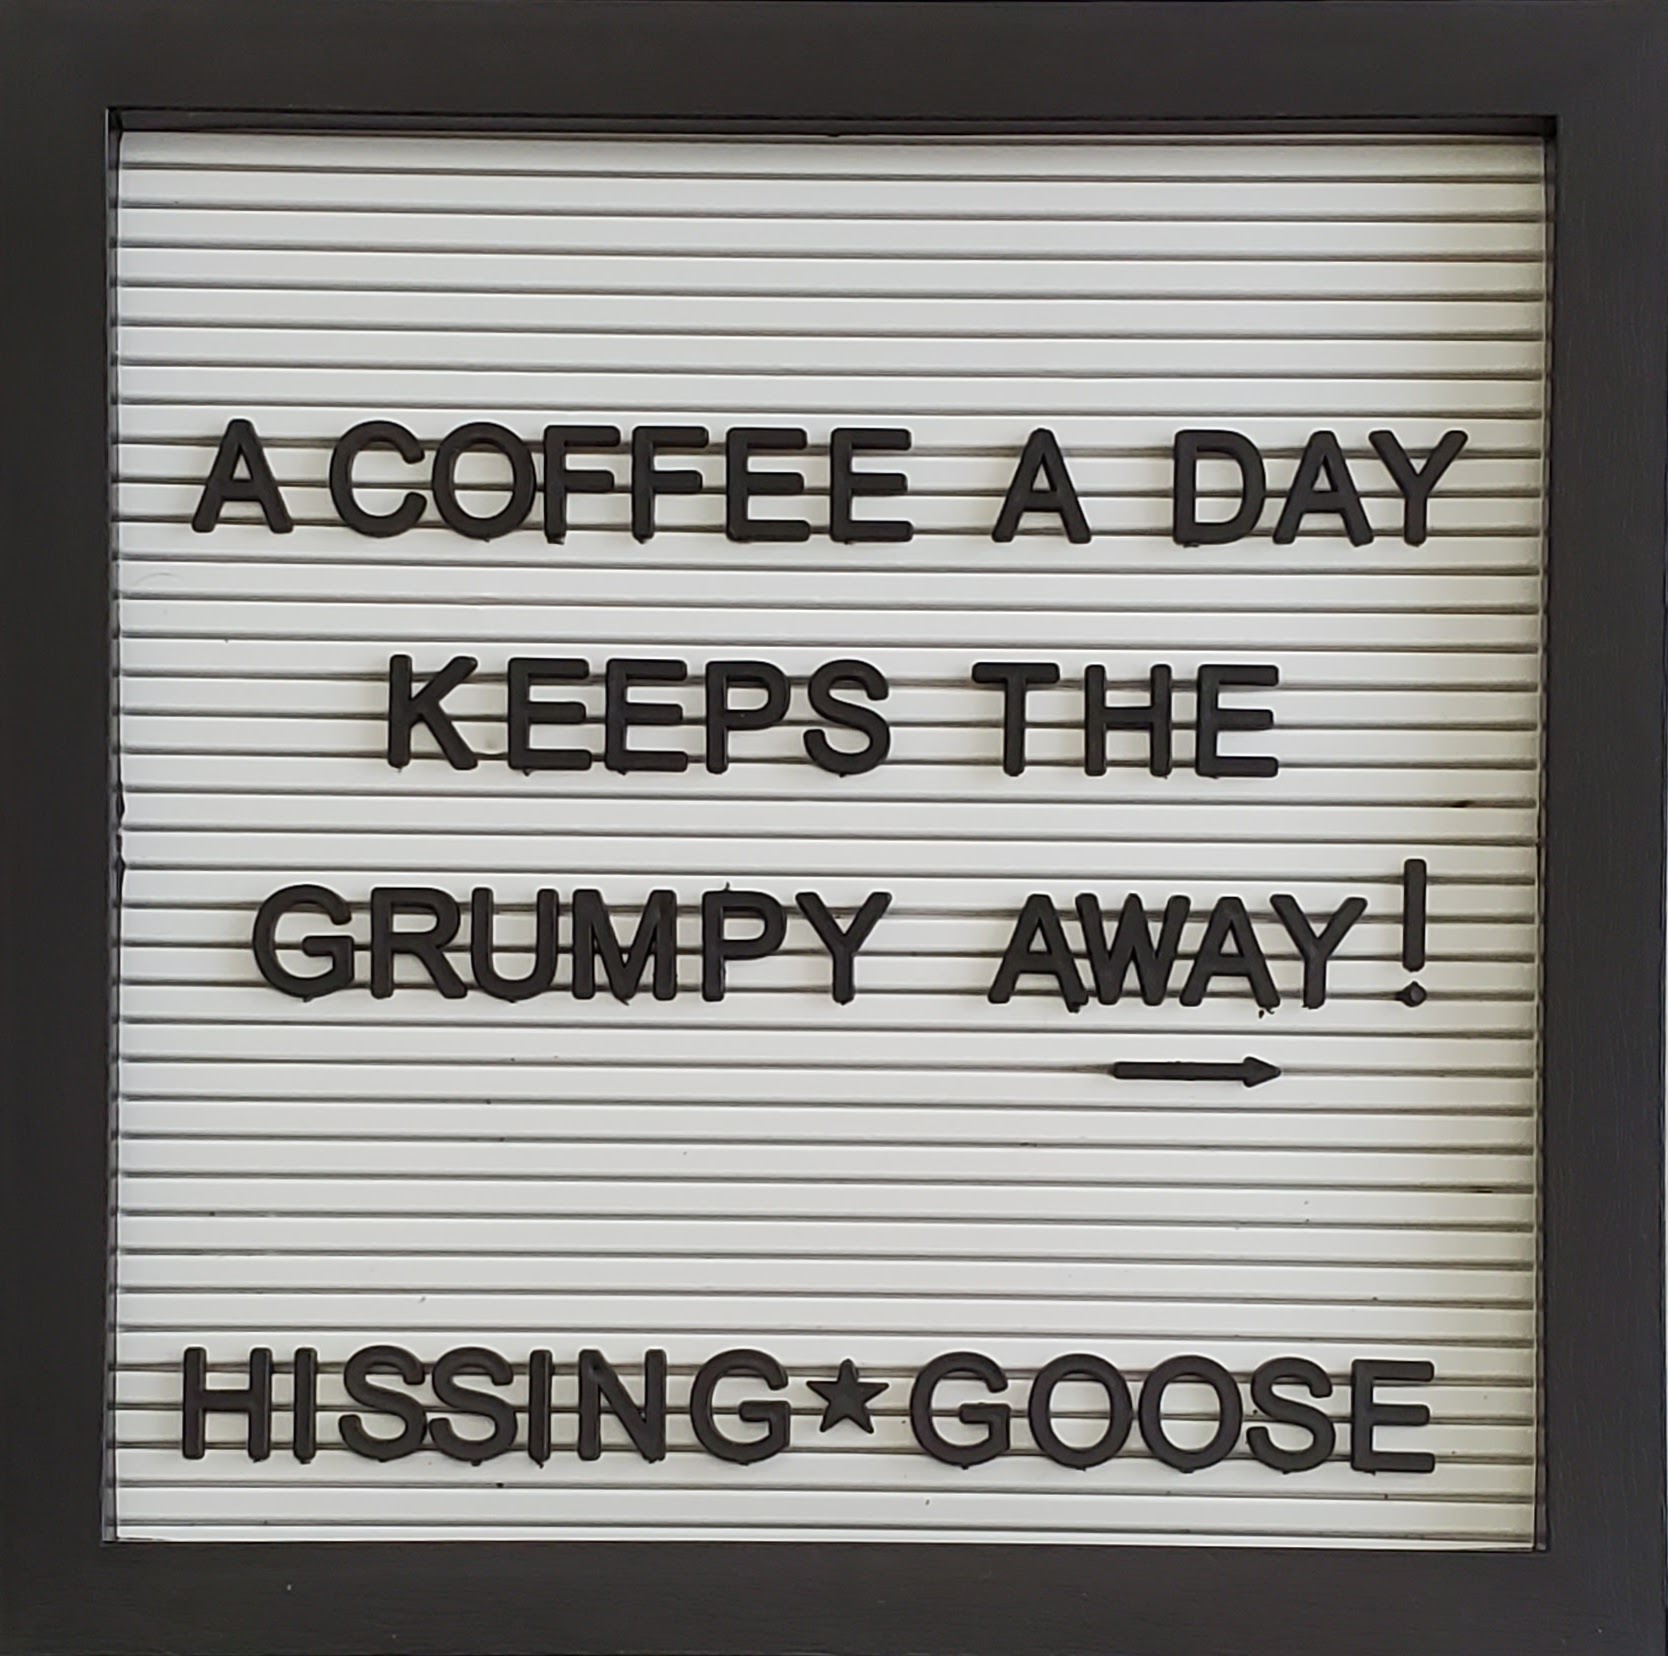 A coffee a day keeps the grumpy away!  Hissing Goose